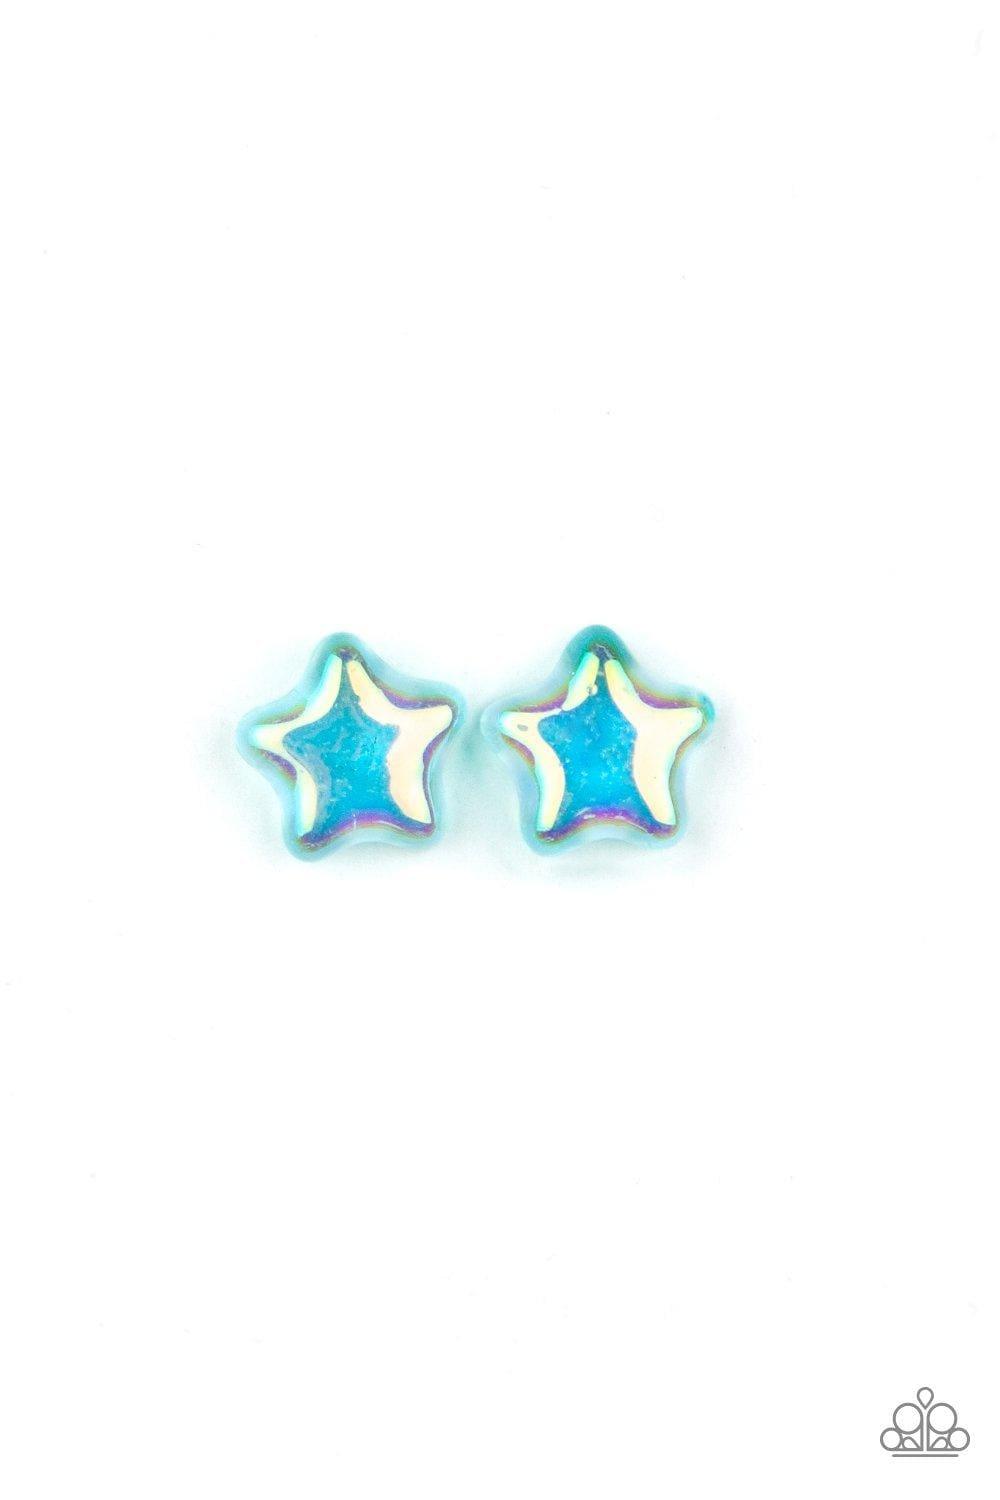 Paparazzi Accessories - Paparazzi Starlet Shimmer Jewelry - Star Earrings - Bling by JessieK